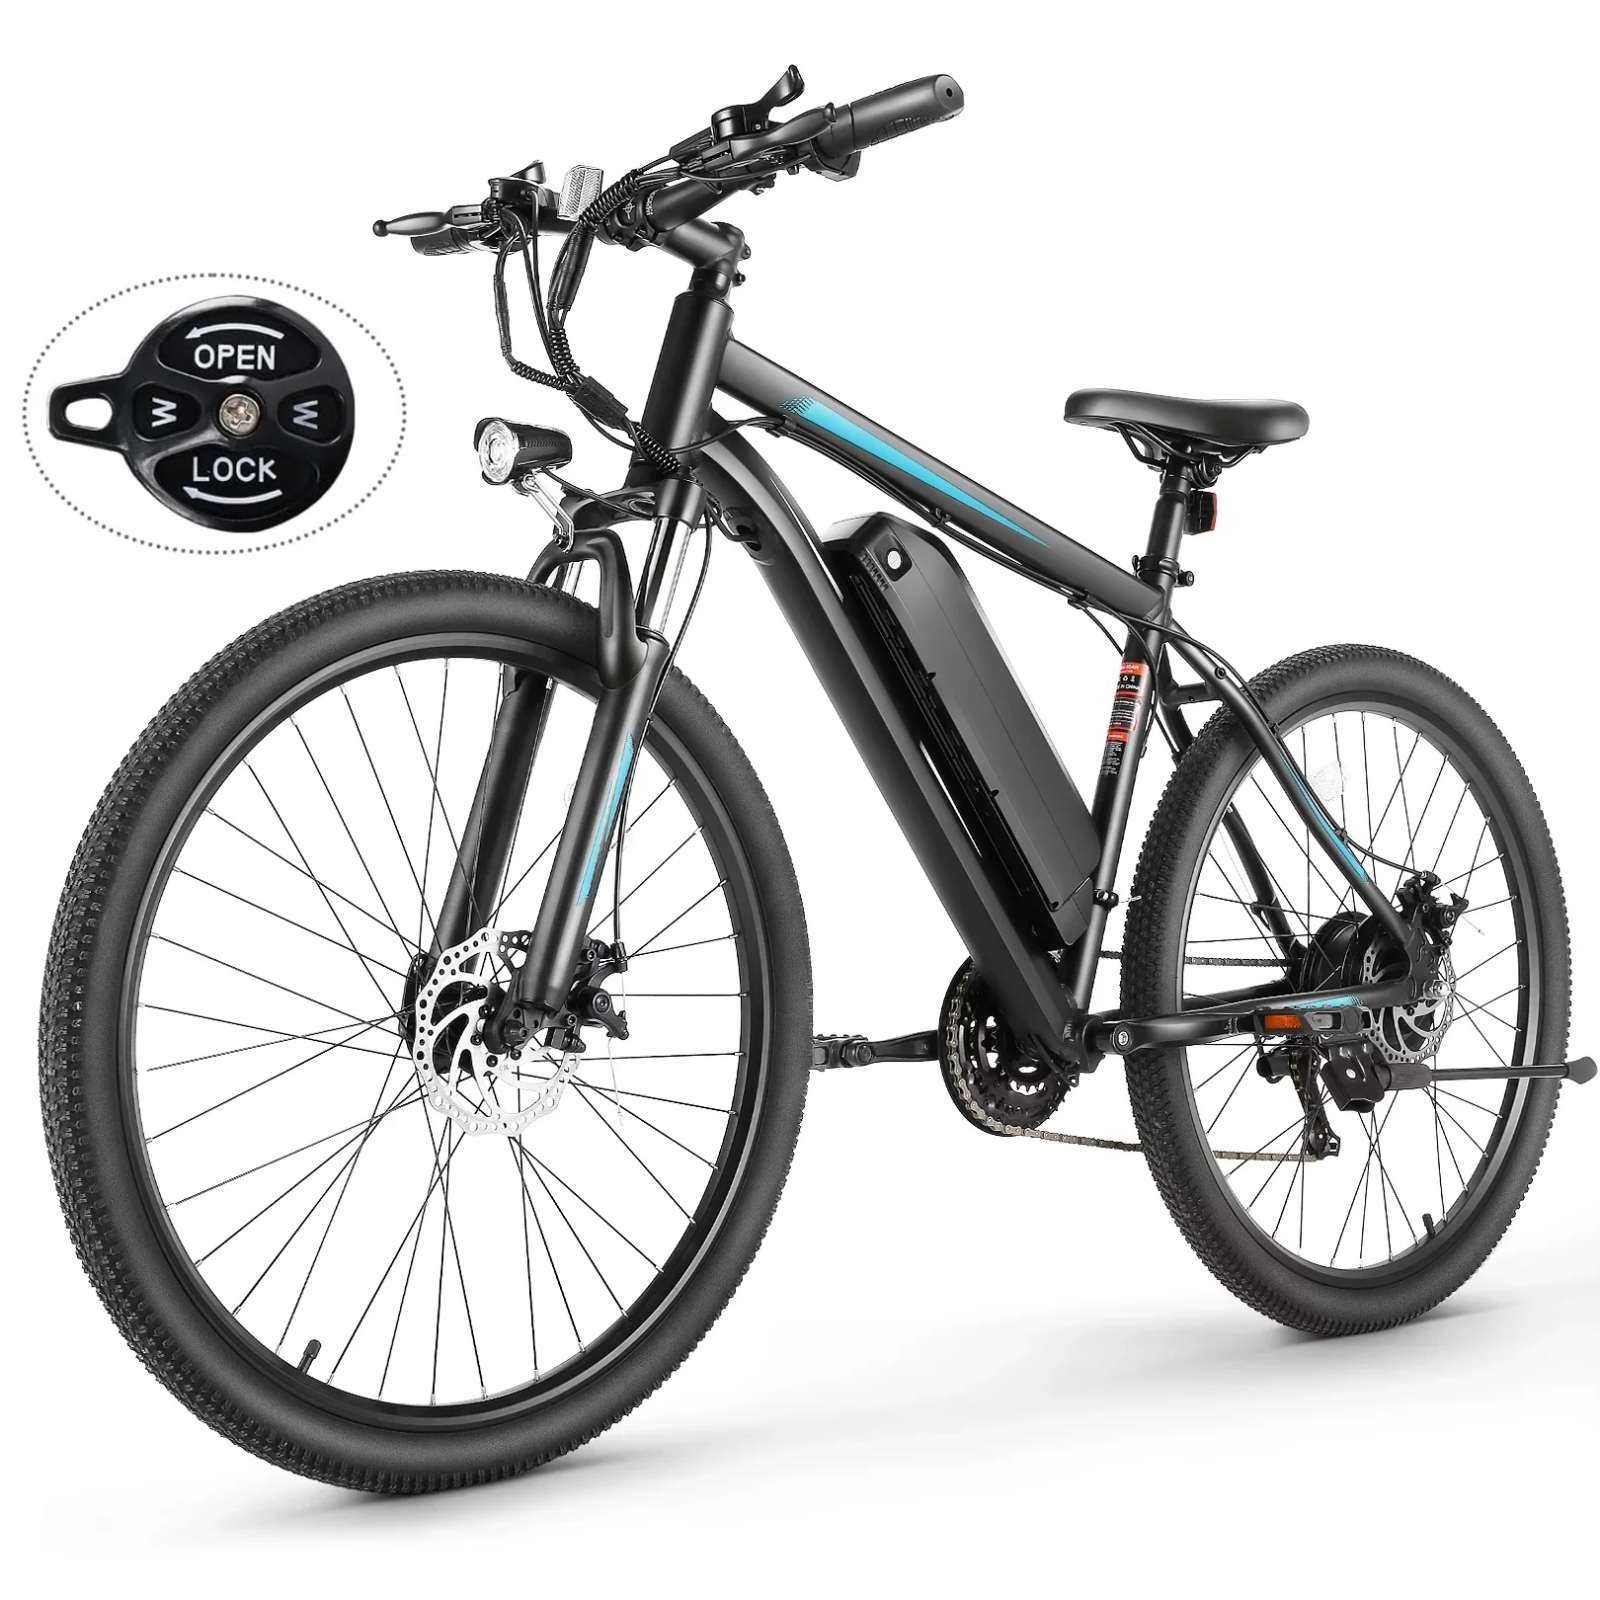 Electric Bike, 26" x 4" Fat Tire Electric Bike for Adults 500W 19.8MPH Electric Mountain Bicycle Snow Beach Ebike, 48V 10.4Ah Battery, Lockable Suspension Fork, LCD Display, Fast Charge, Red - image 14 of 16